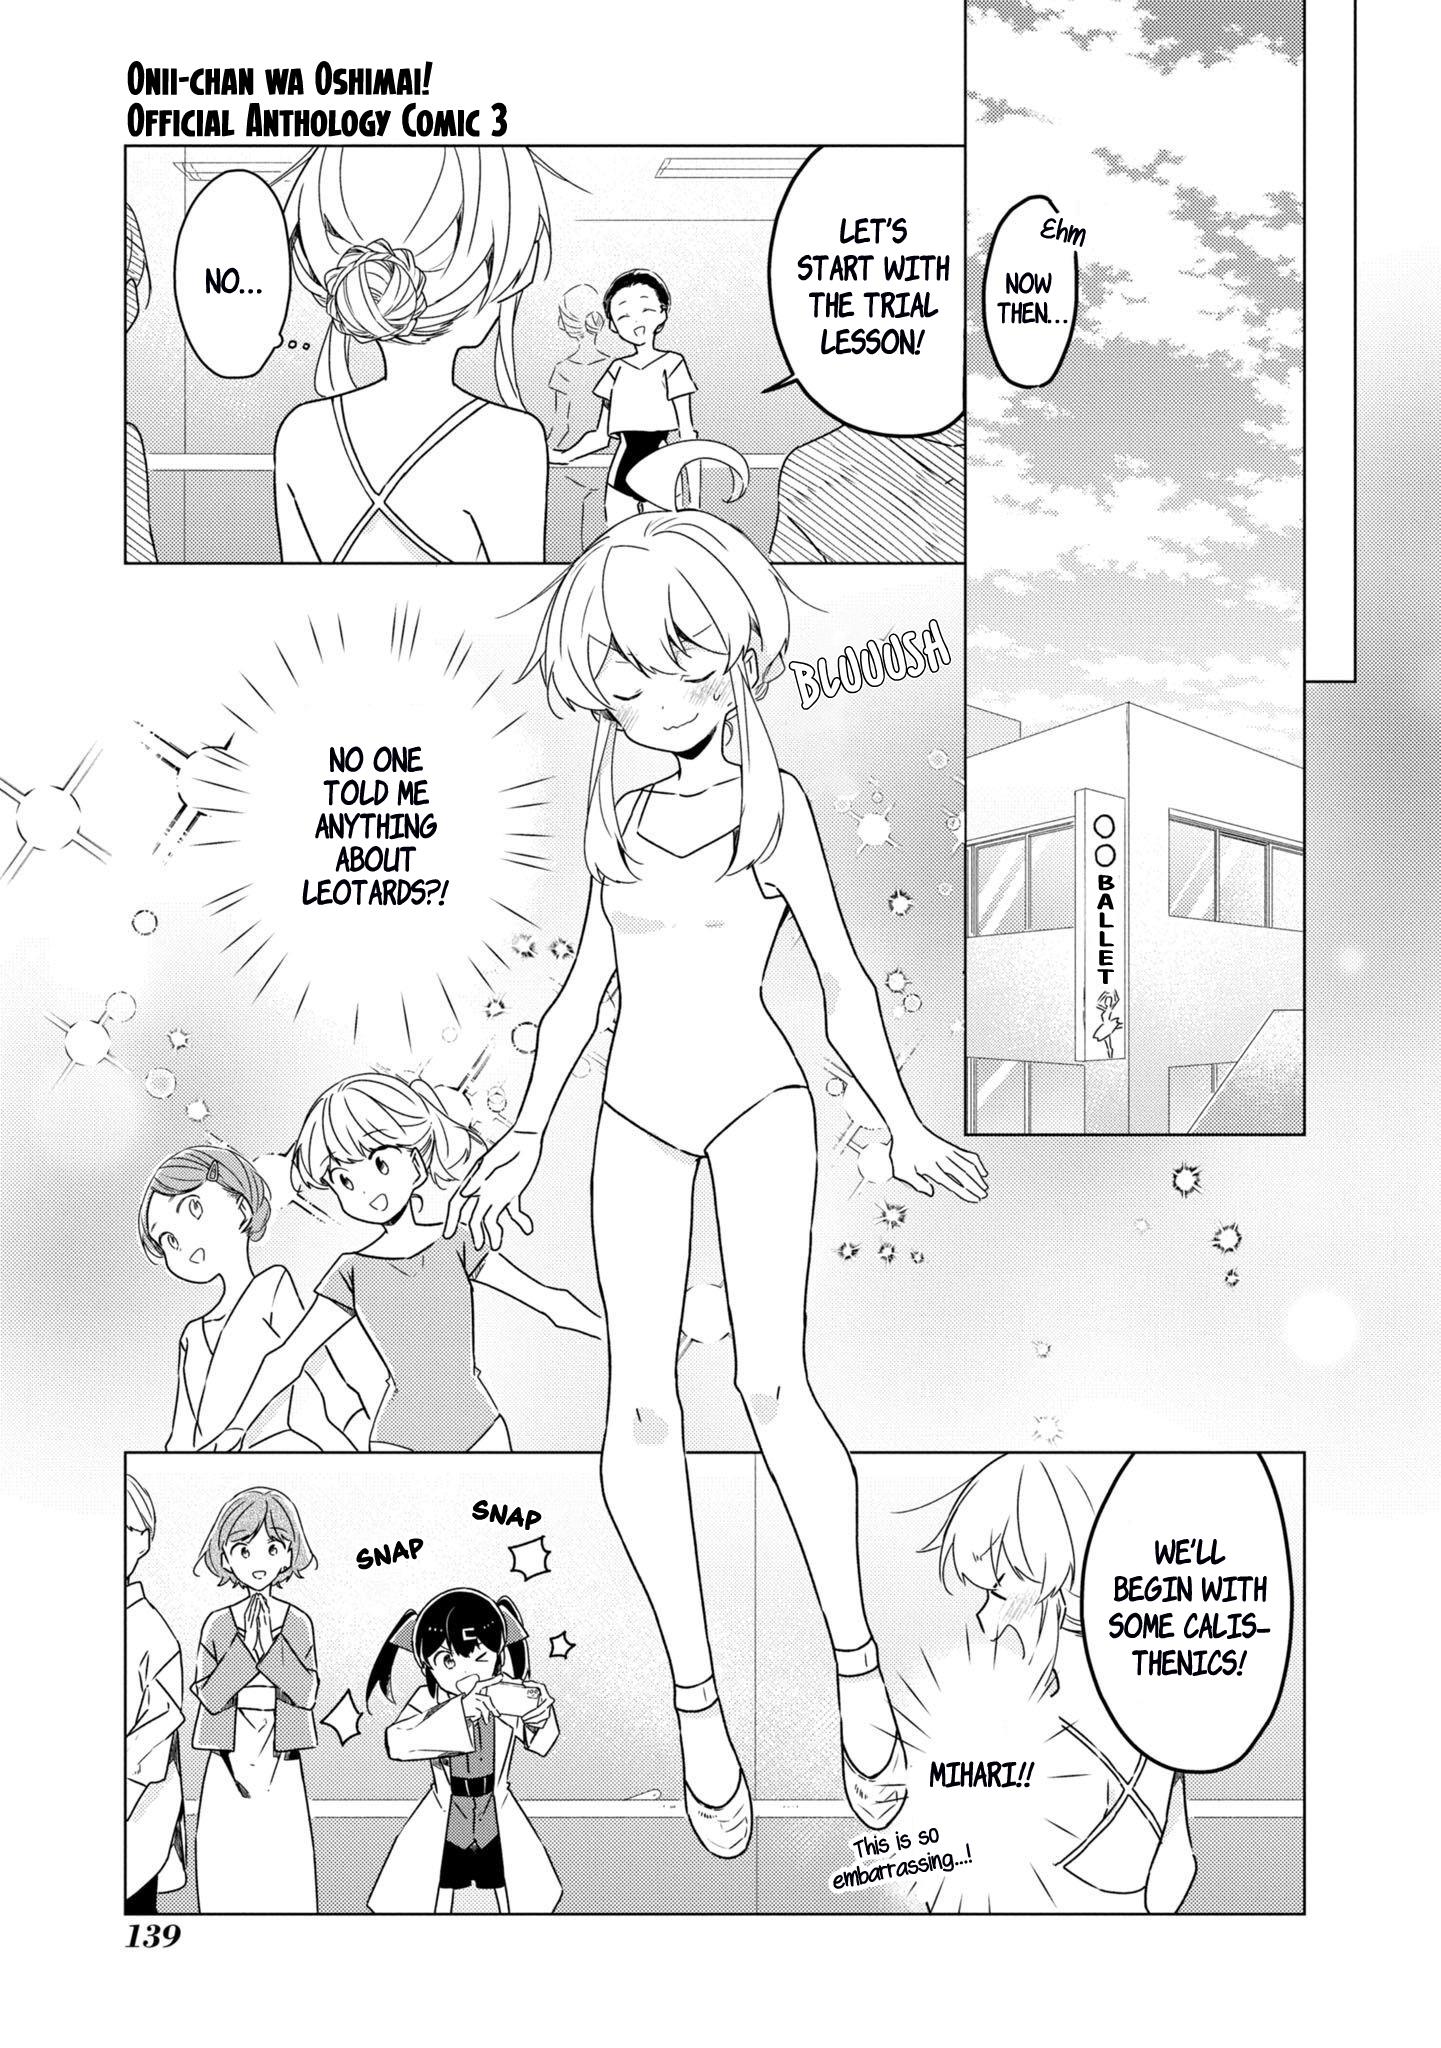 Onii-Chan Is Done For! Official Anthology Comic - chapter 45 - #5